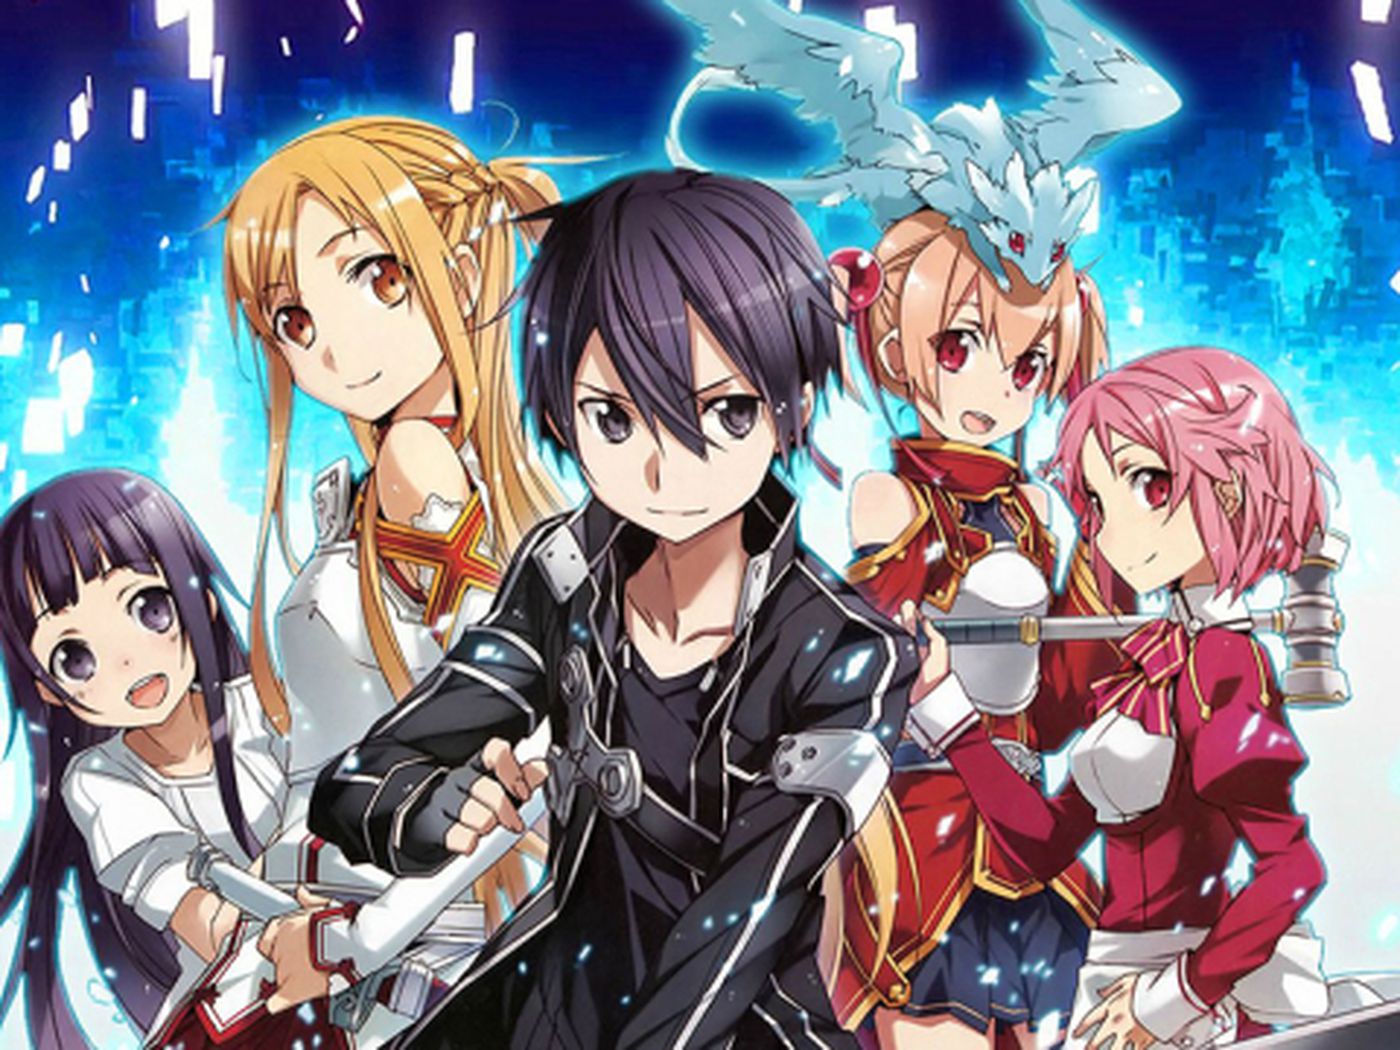 Sword Art Online being adapted into a live-action TV series - Polygon